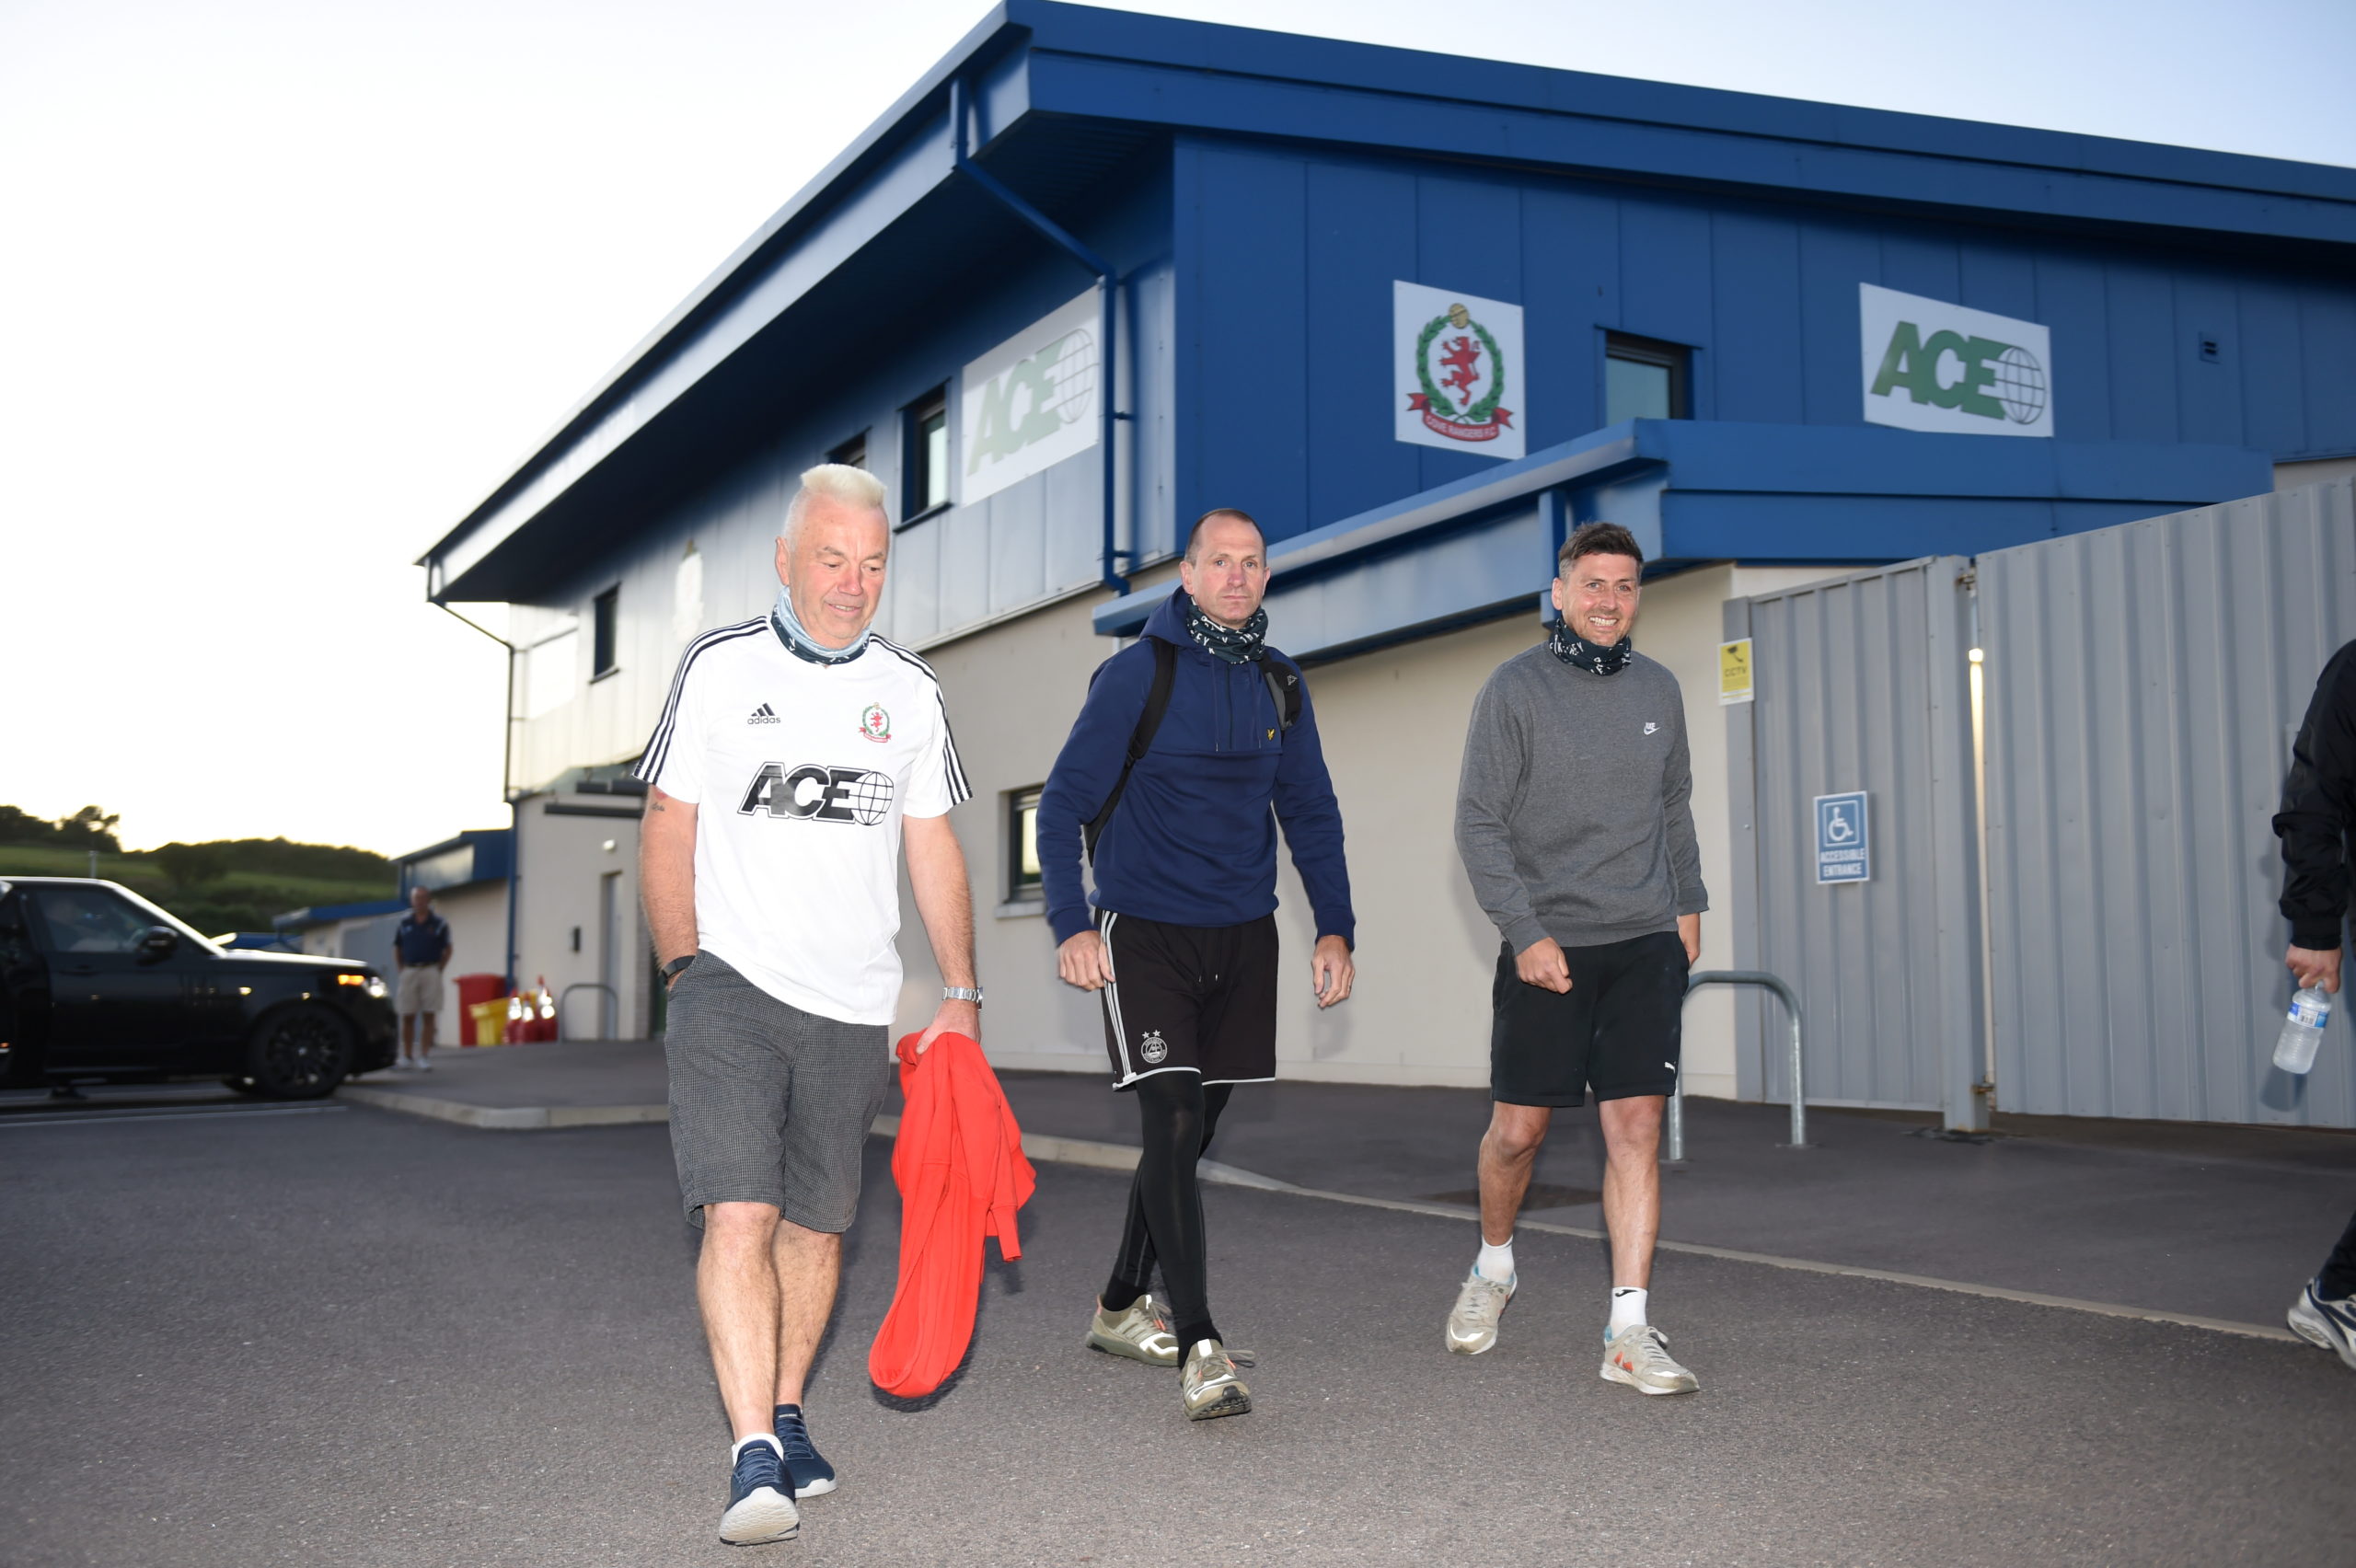 Ian Yule, Mark Perry and Roy McBain as they set off on their fundraising walk from the Balmoral Stadium to Tannadice.
Picture by Paul Glendell